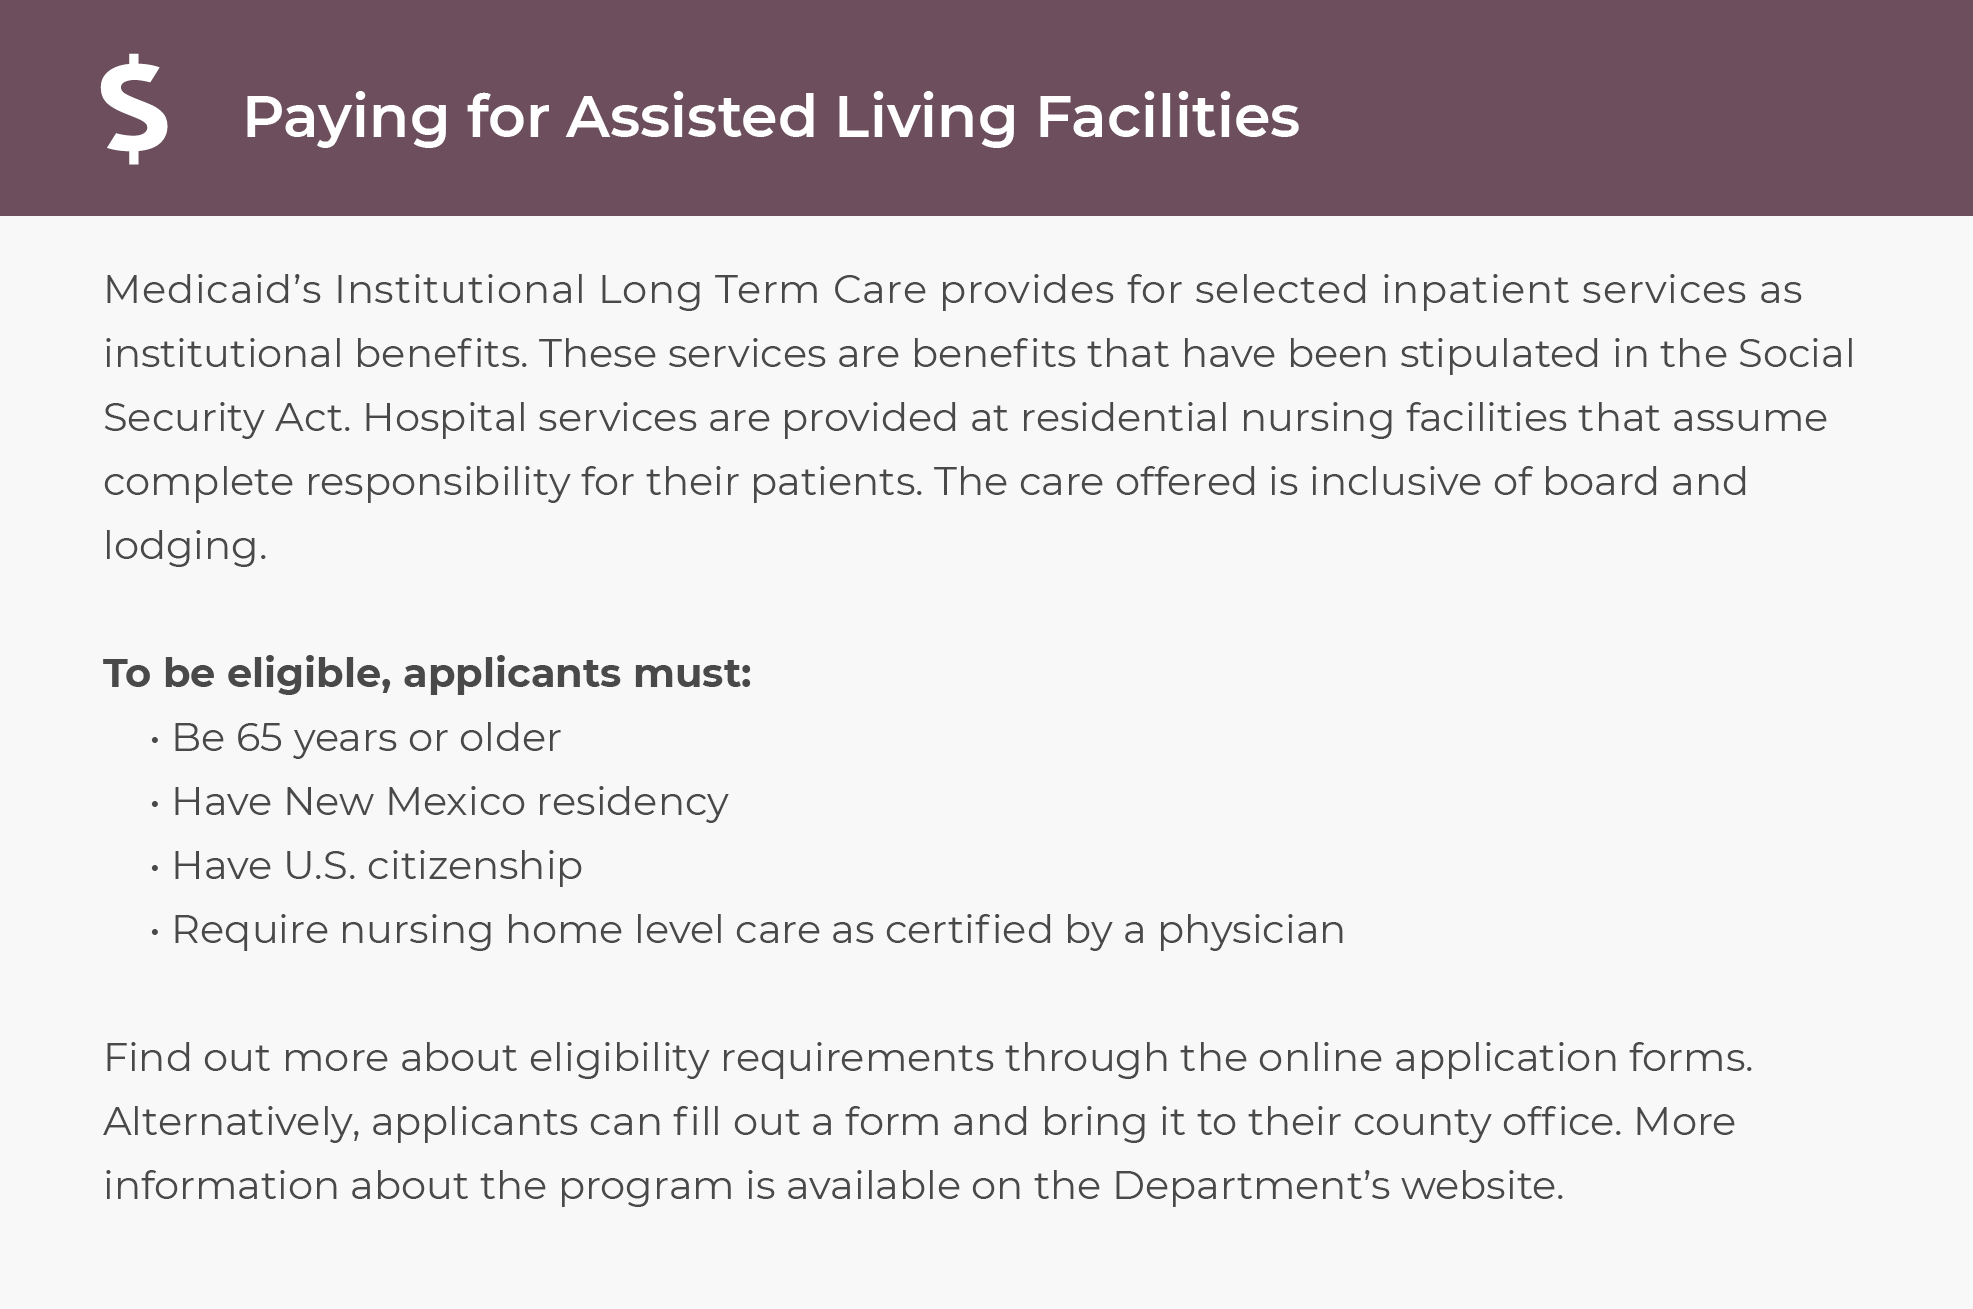 Paying for assised living facilities in New Mexico